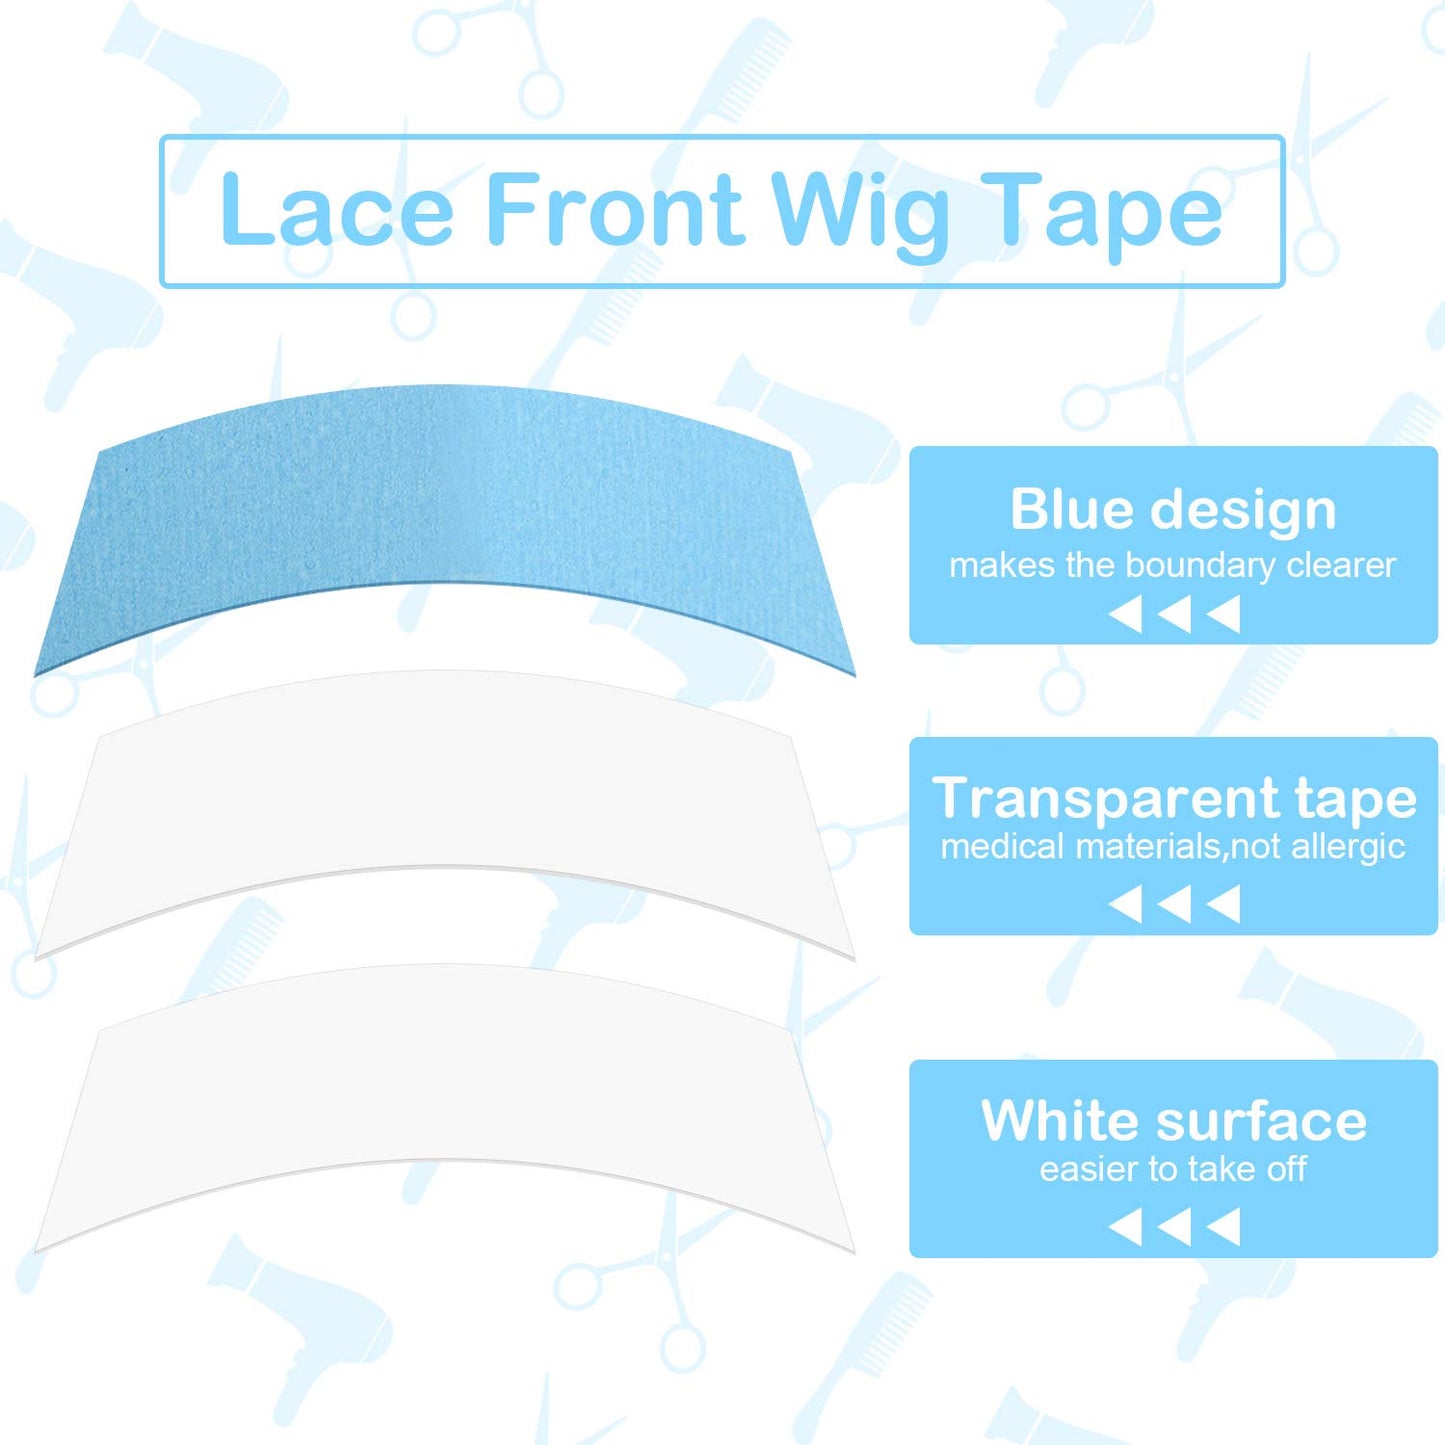 Blulu 48 Pieces Lace Front Tape Wig Lace Front Wig Tape Adhesive Tape Double-Sided Waterproof Lace Wigs Tape C-Shaped Hair Wig Tape for Wigs Toupees Hair Pieces and Hair Extension